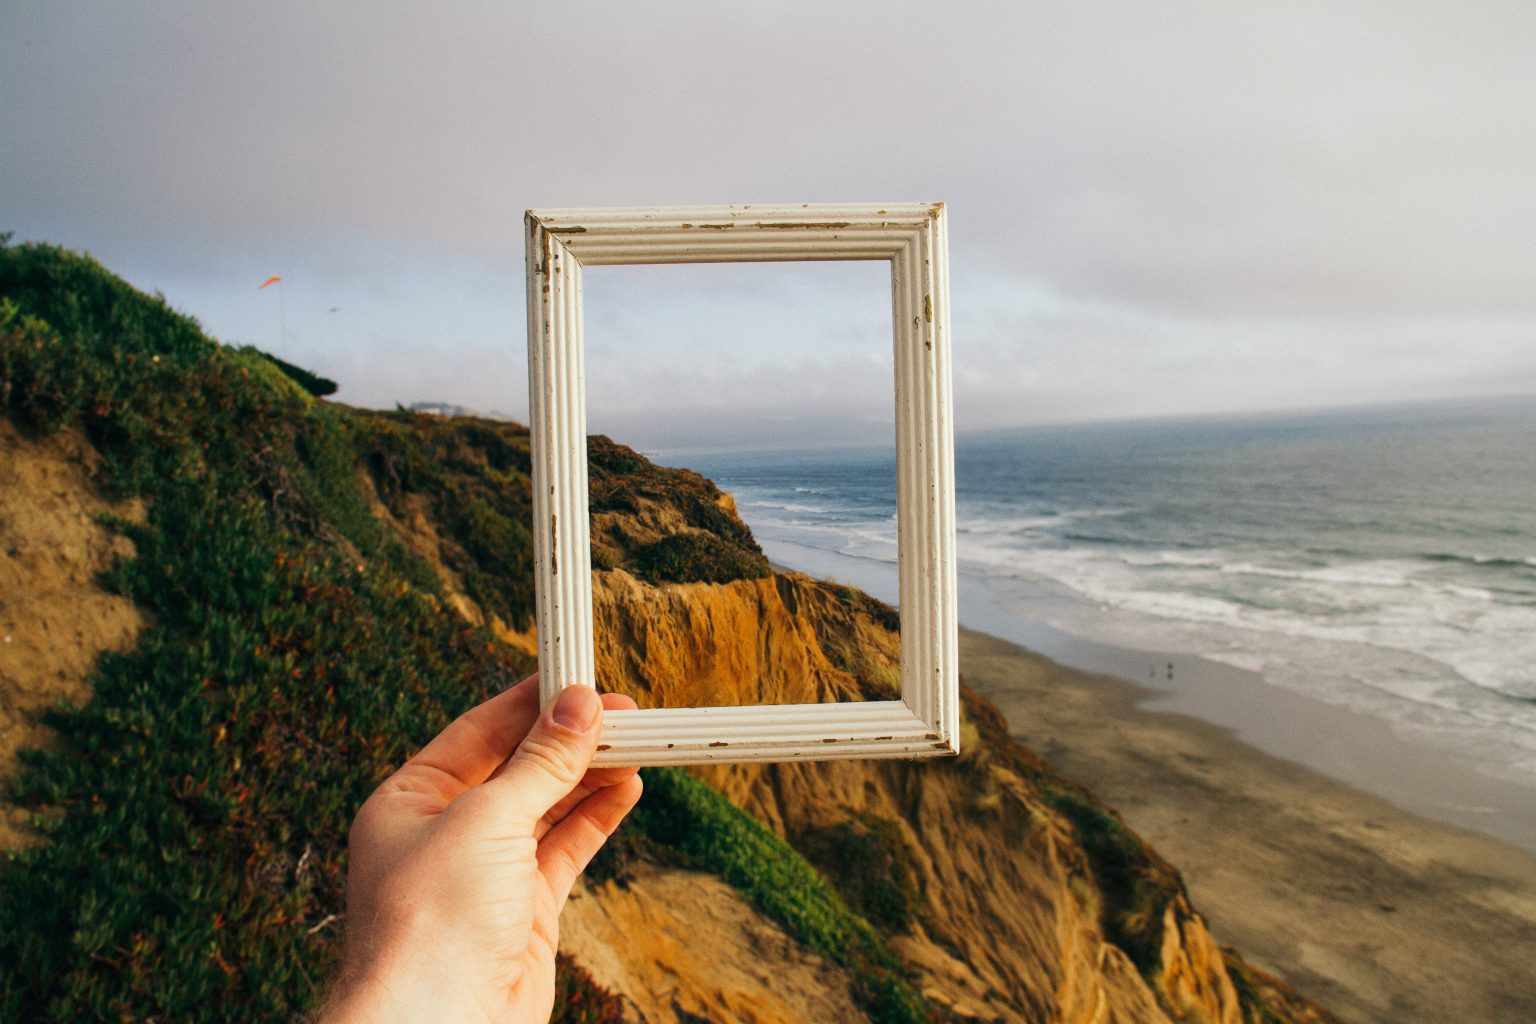 Photo of a hand holding up a frame in front of a backdrop of cliffs and the ocean.